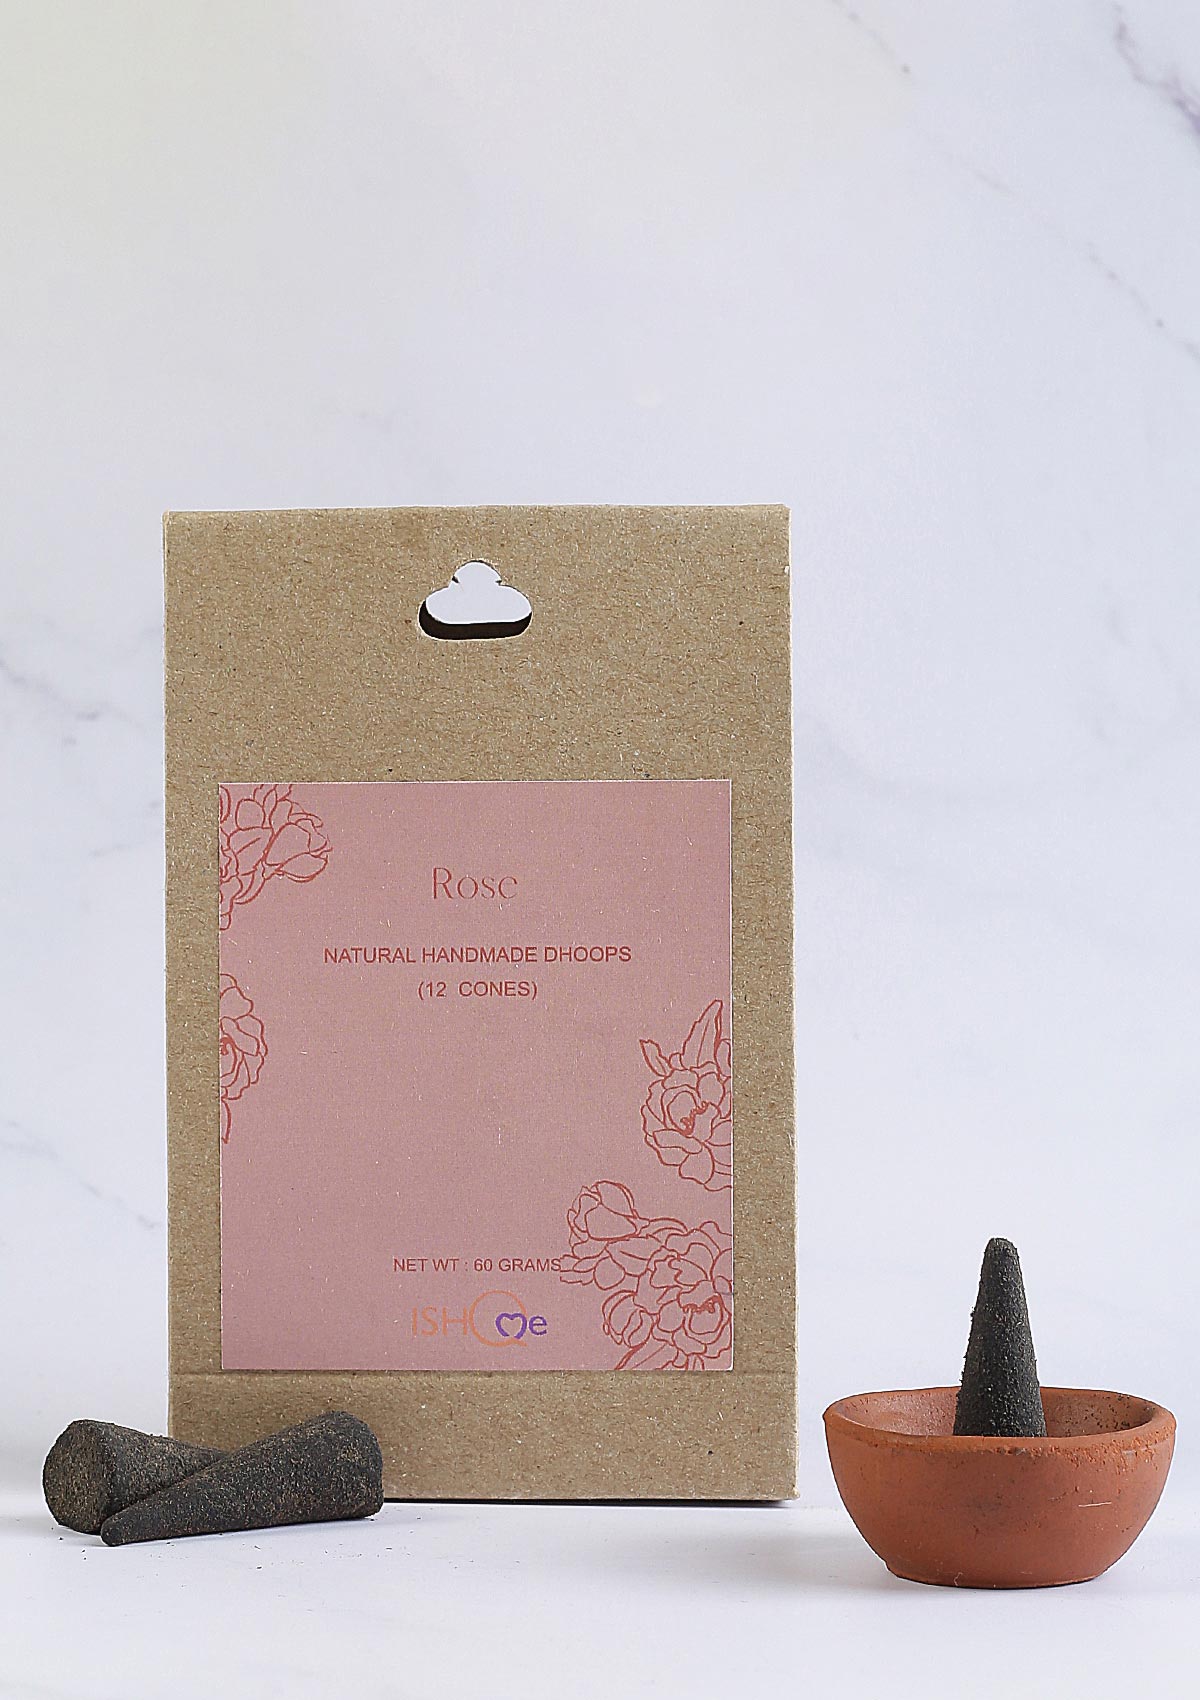 Floral and Earthy Elegance: IshqMe's Rose, Jasmine, and Musk Incense Cones - IshqMe